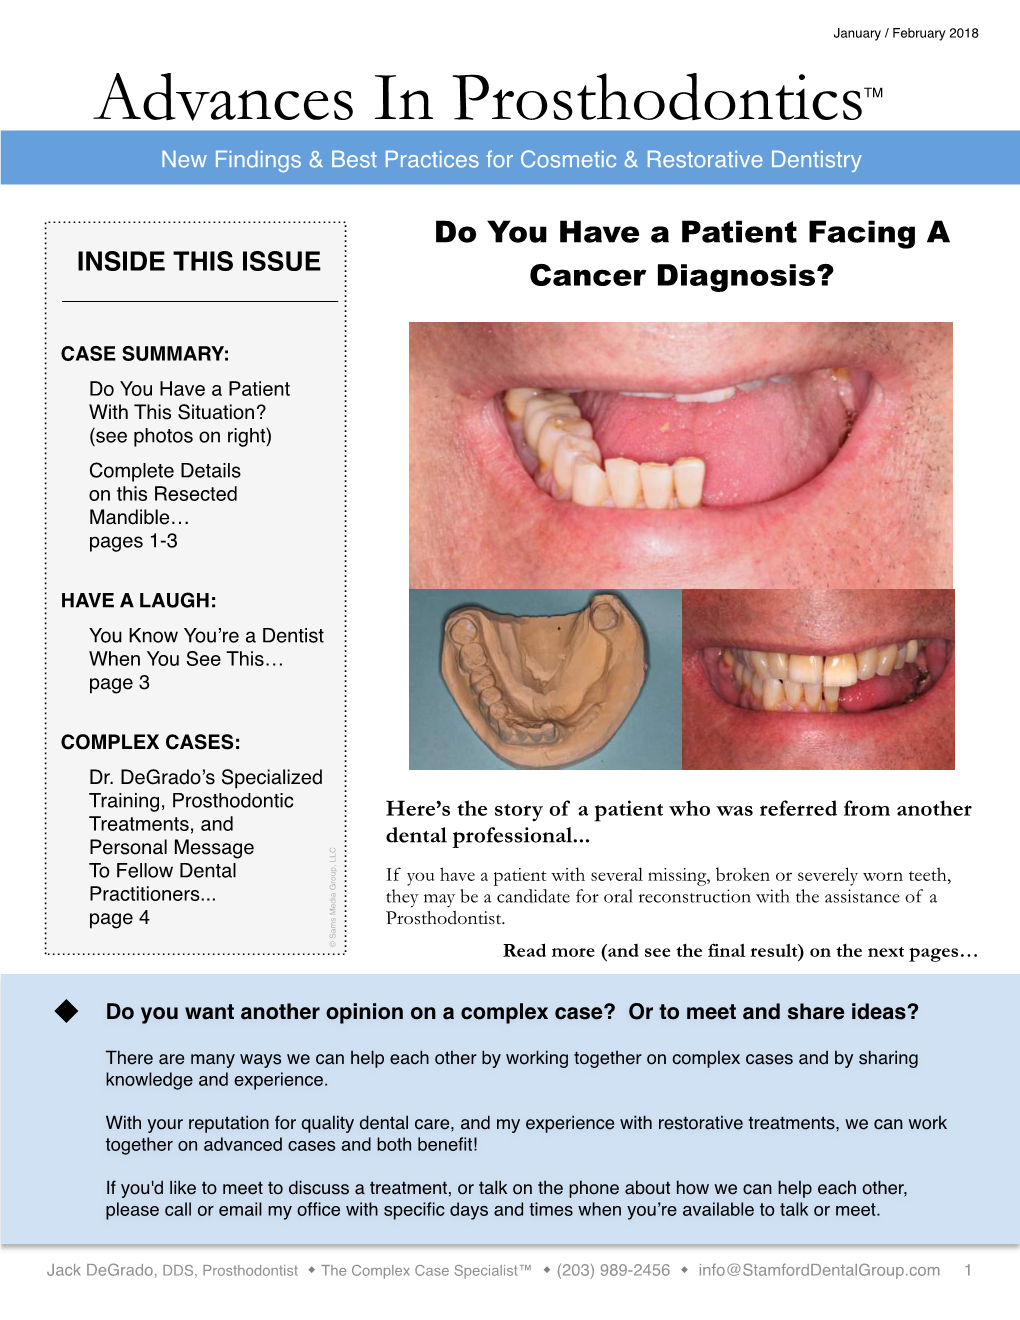 Advances in Prosthodonticstm New Findings & Best Practices for Cosmetic & Restorative Dentistry